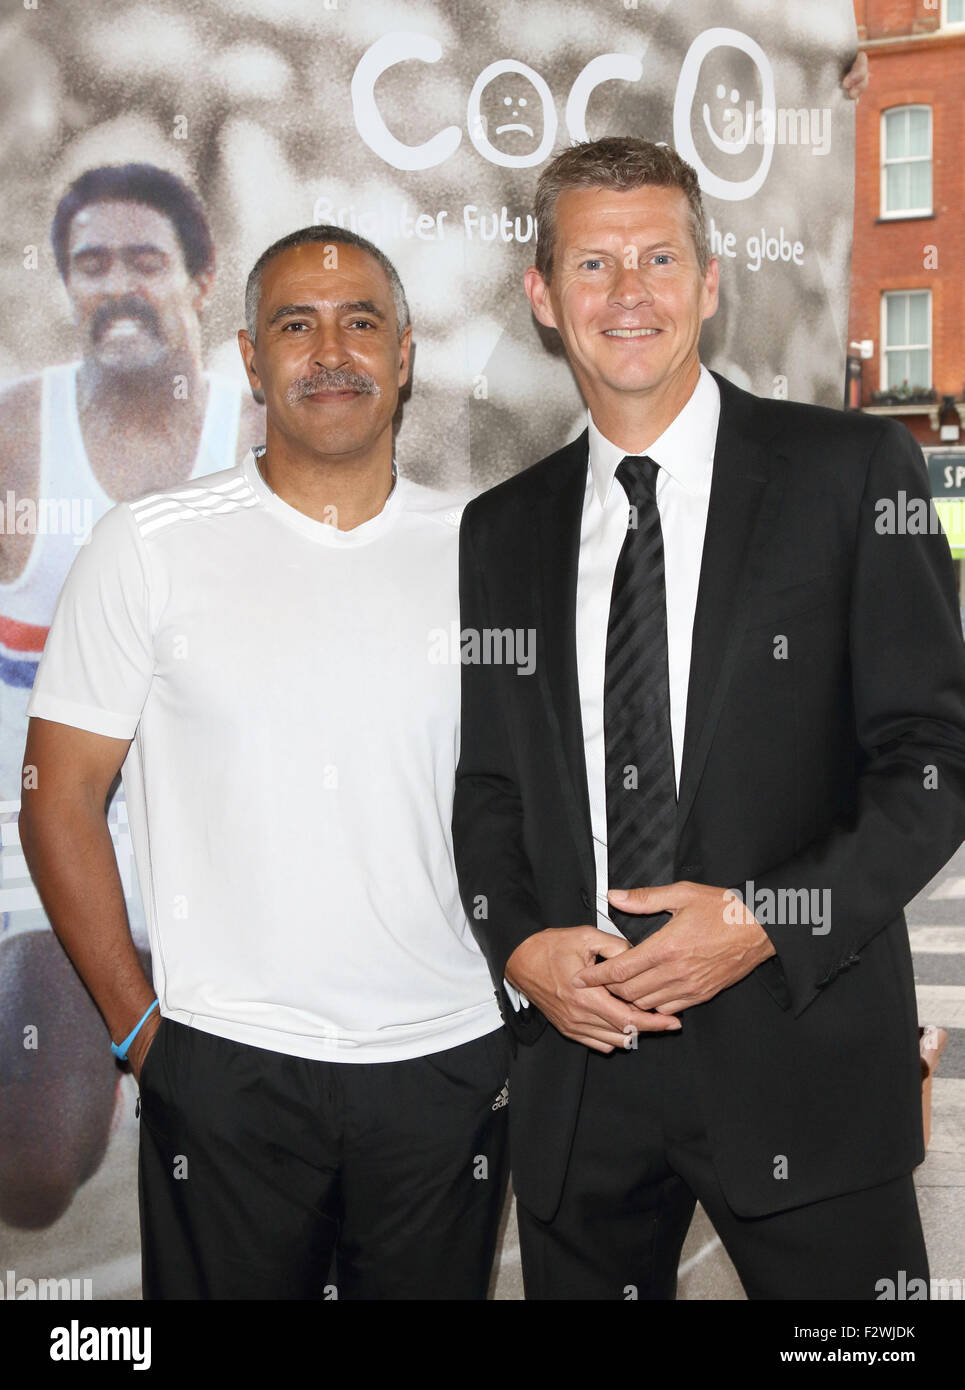 'An Audience With Daley' event in aid of the charity Coco held at the Royal Garden Hotel  Featuring: Daley Thompson, Steve Cram Where: London, United Kingdom When: 23 Jul 2015 Stock Photo